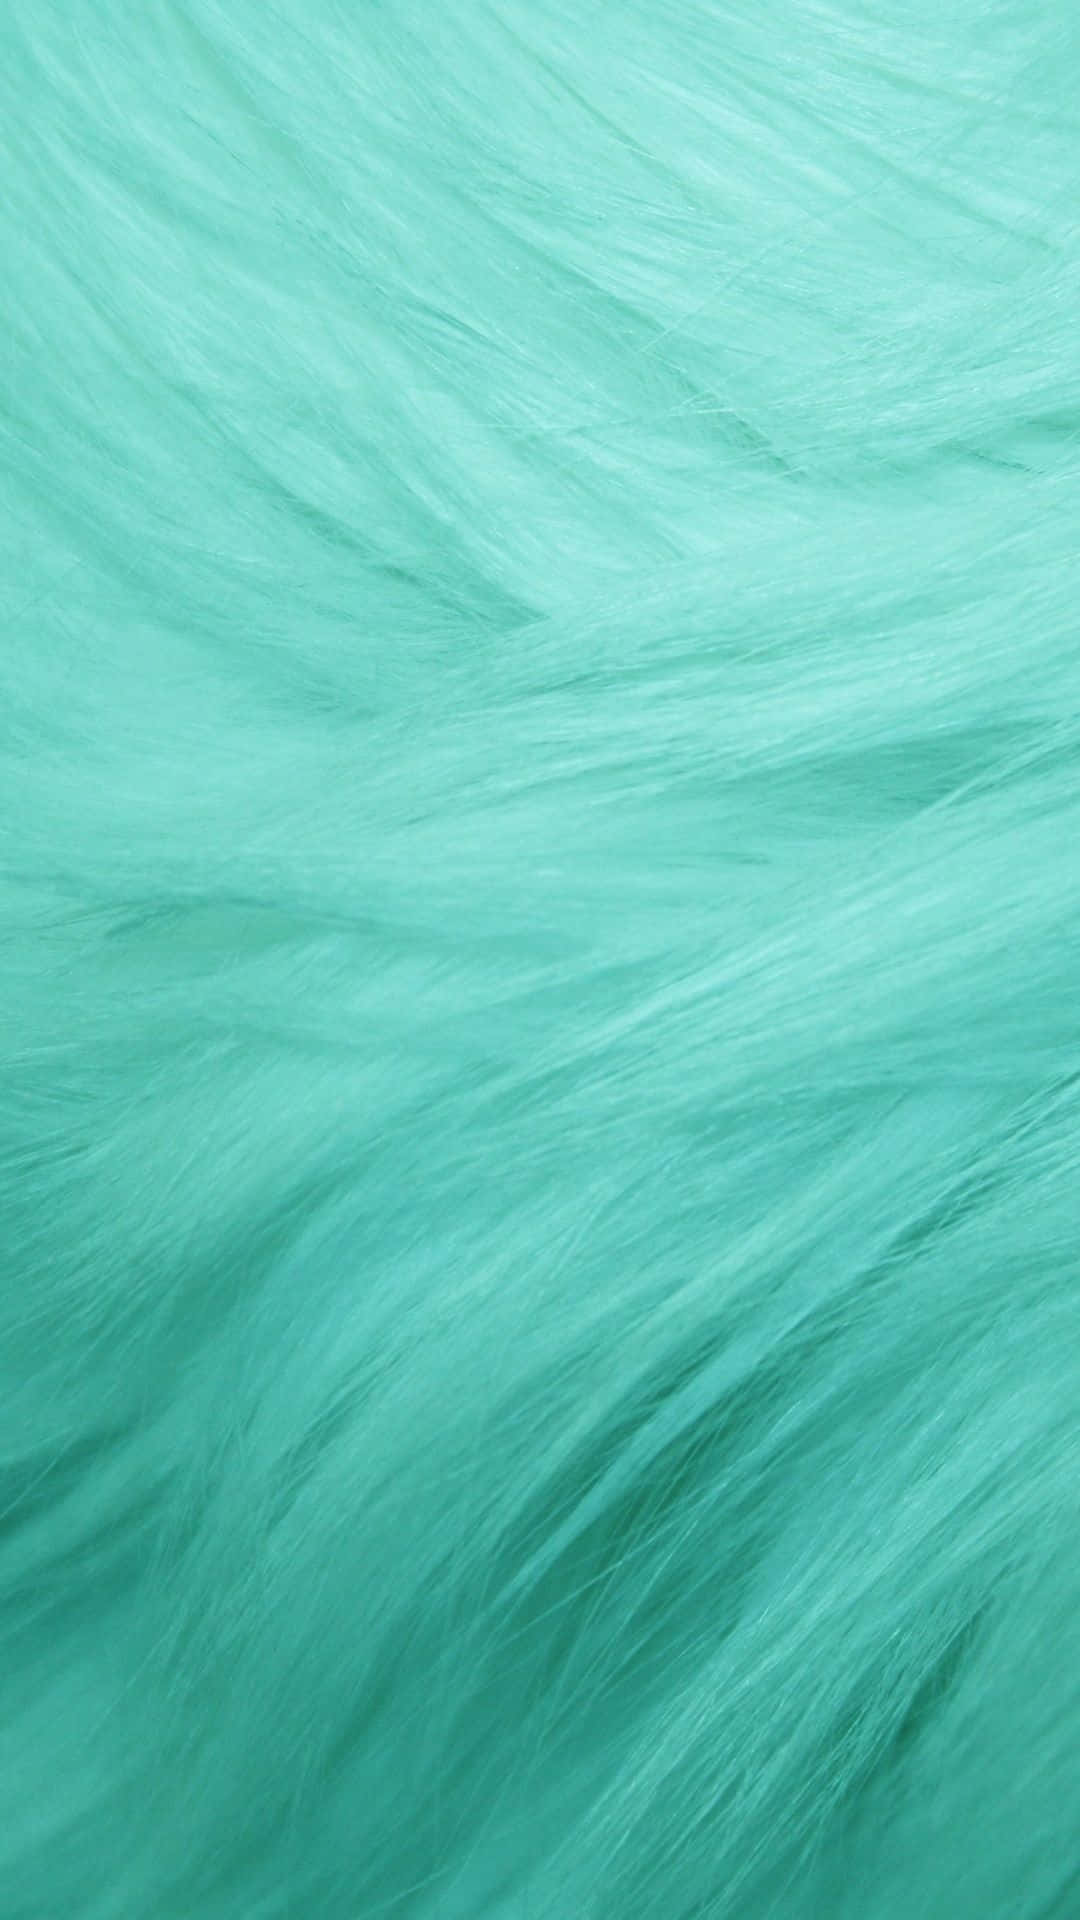 Download A soothing Seafoam Green wallpaper that brings tranquility to any  space Wallpaper  Wallpaperscom